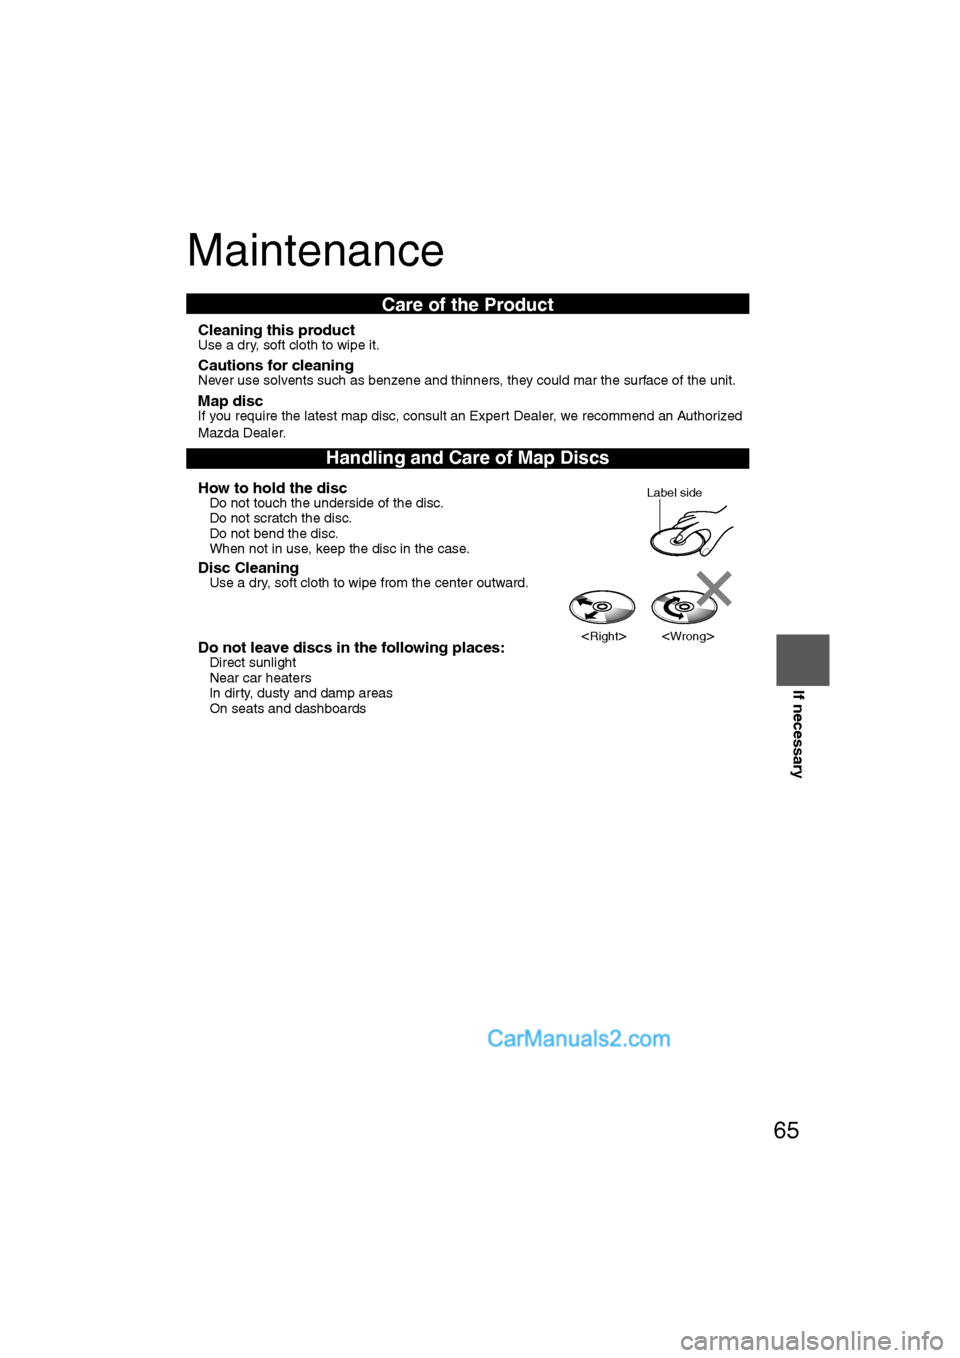 MAZDA MODEL CX-9 2009  Navigation Manual (in English) 65
Before 
UseGetting
started
RoutingAddress 
BookVo i c e  
Recognition
Navigation 
Set Up
If necessary
Maintenance
nCleaning this productUse a dry, soft cloth to wipe it.
nCautions for cleaningNever